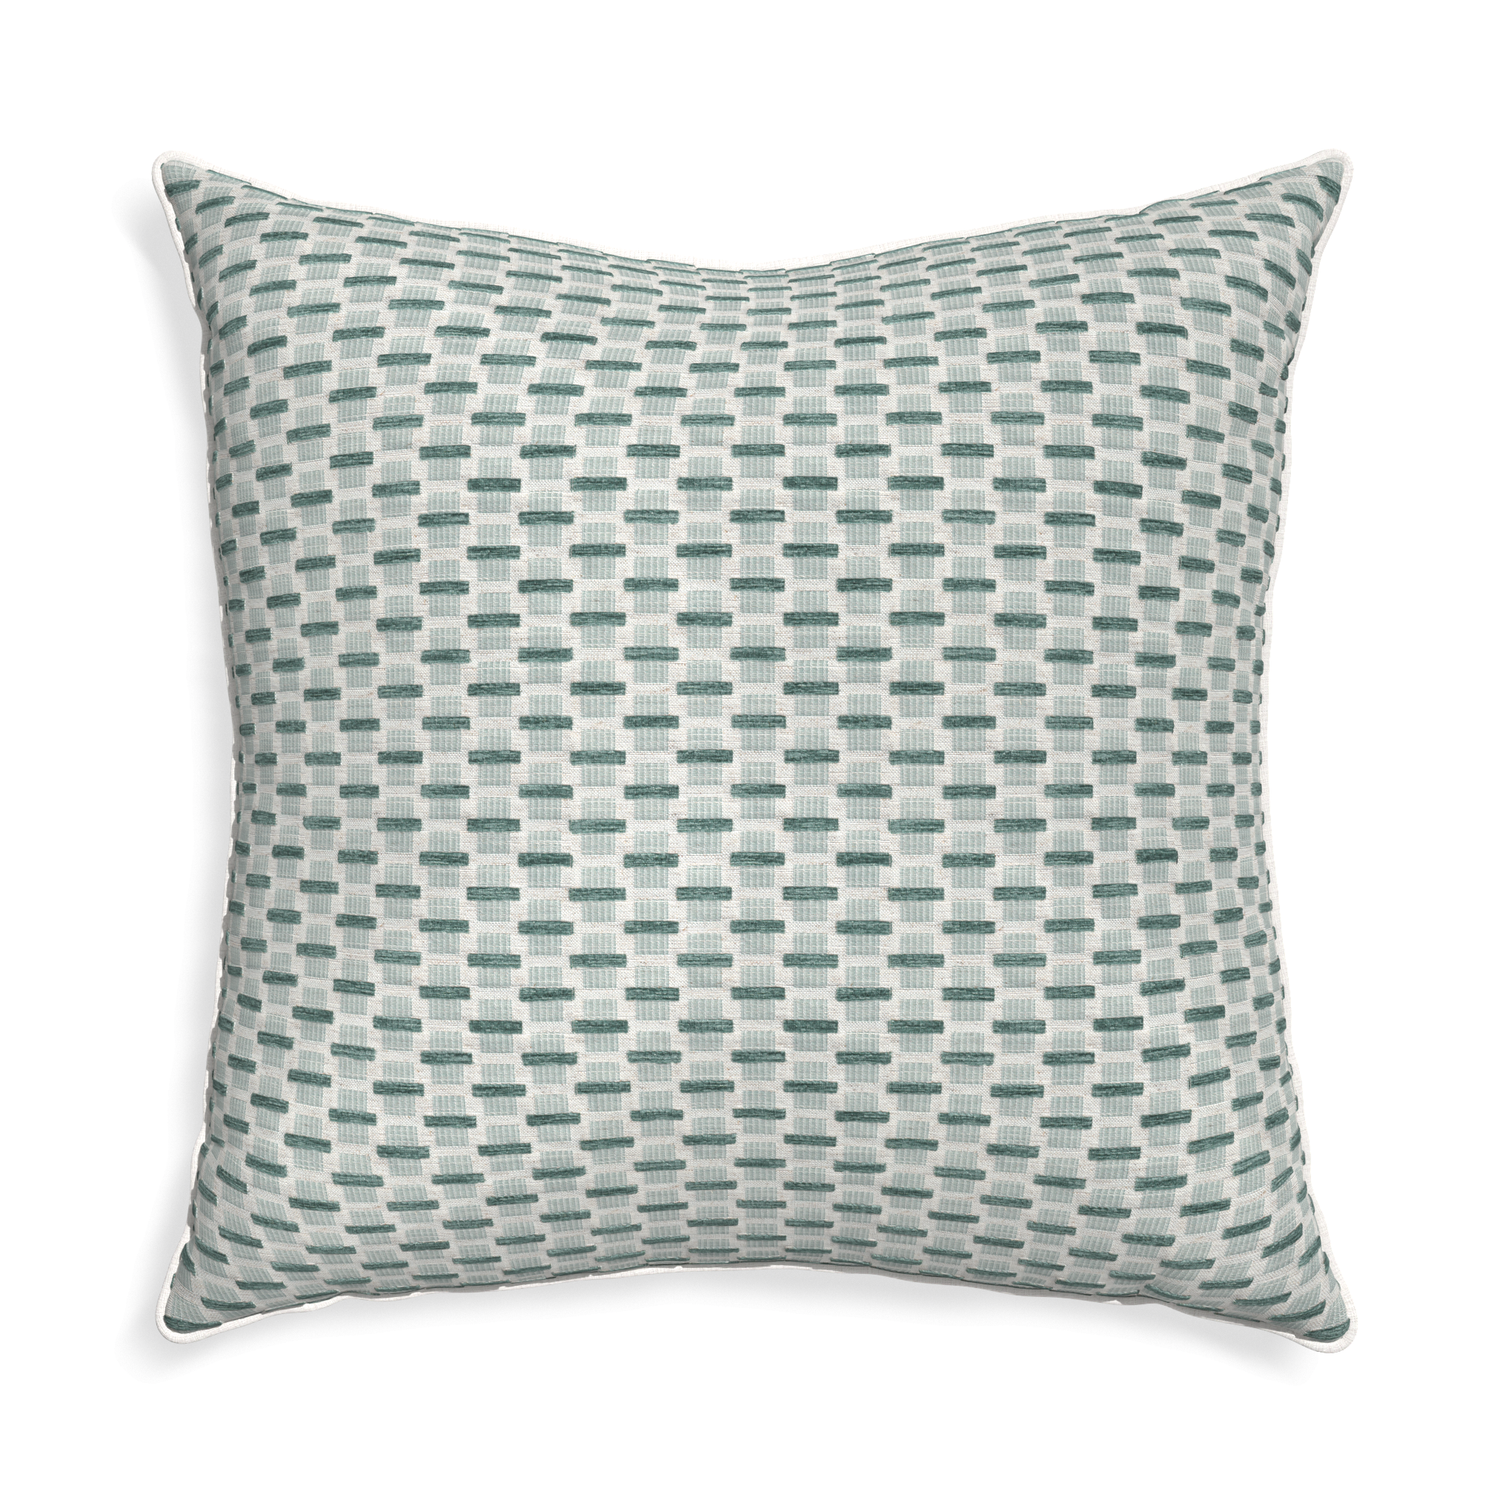 Euro-sham willow mint custom green geometric chenillepillow with snow piping on white background